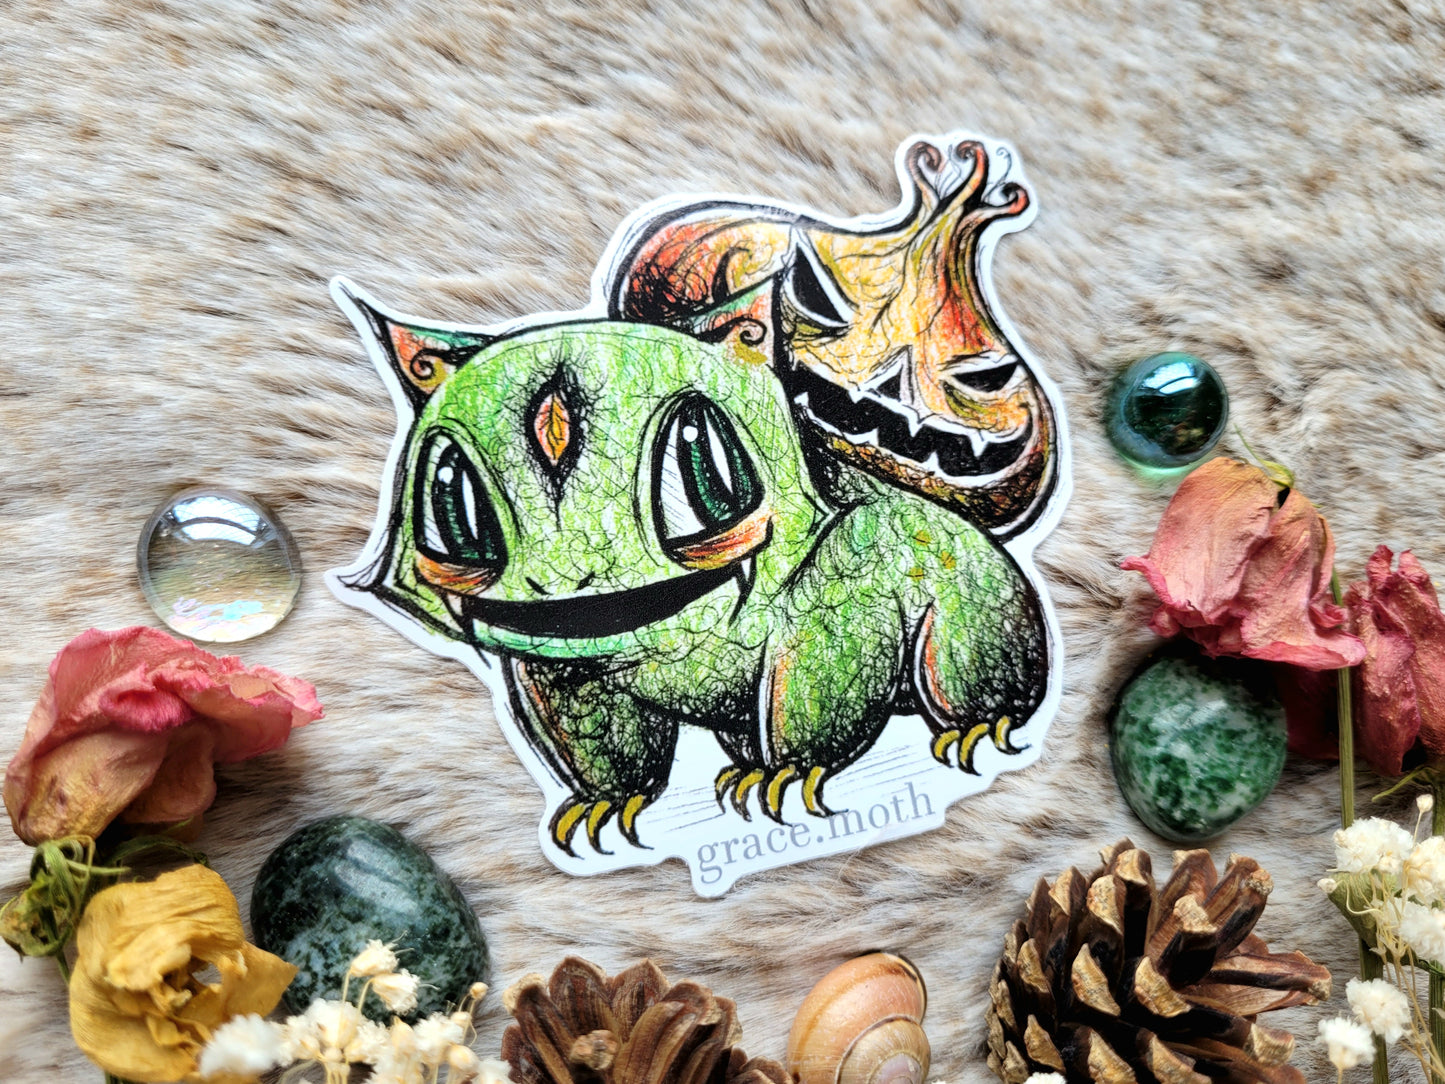 Pumpkin Bulbasaur - Vinyl Pokemon inspired Sticker 10cm - Cottagecore - Witchy - Gothic - Illustrated by Grace moth